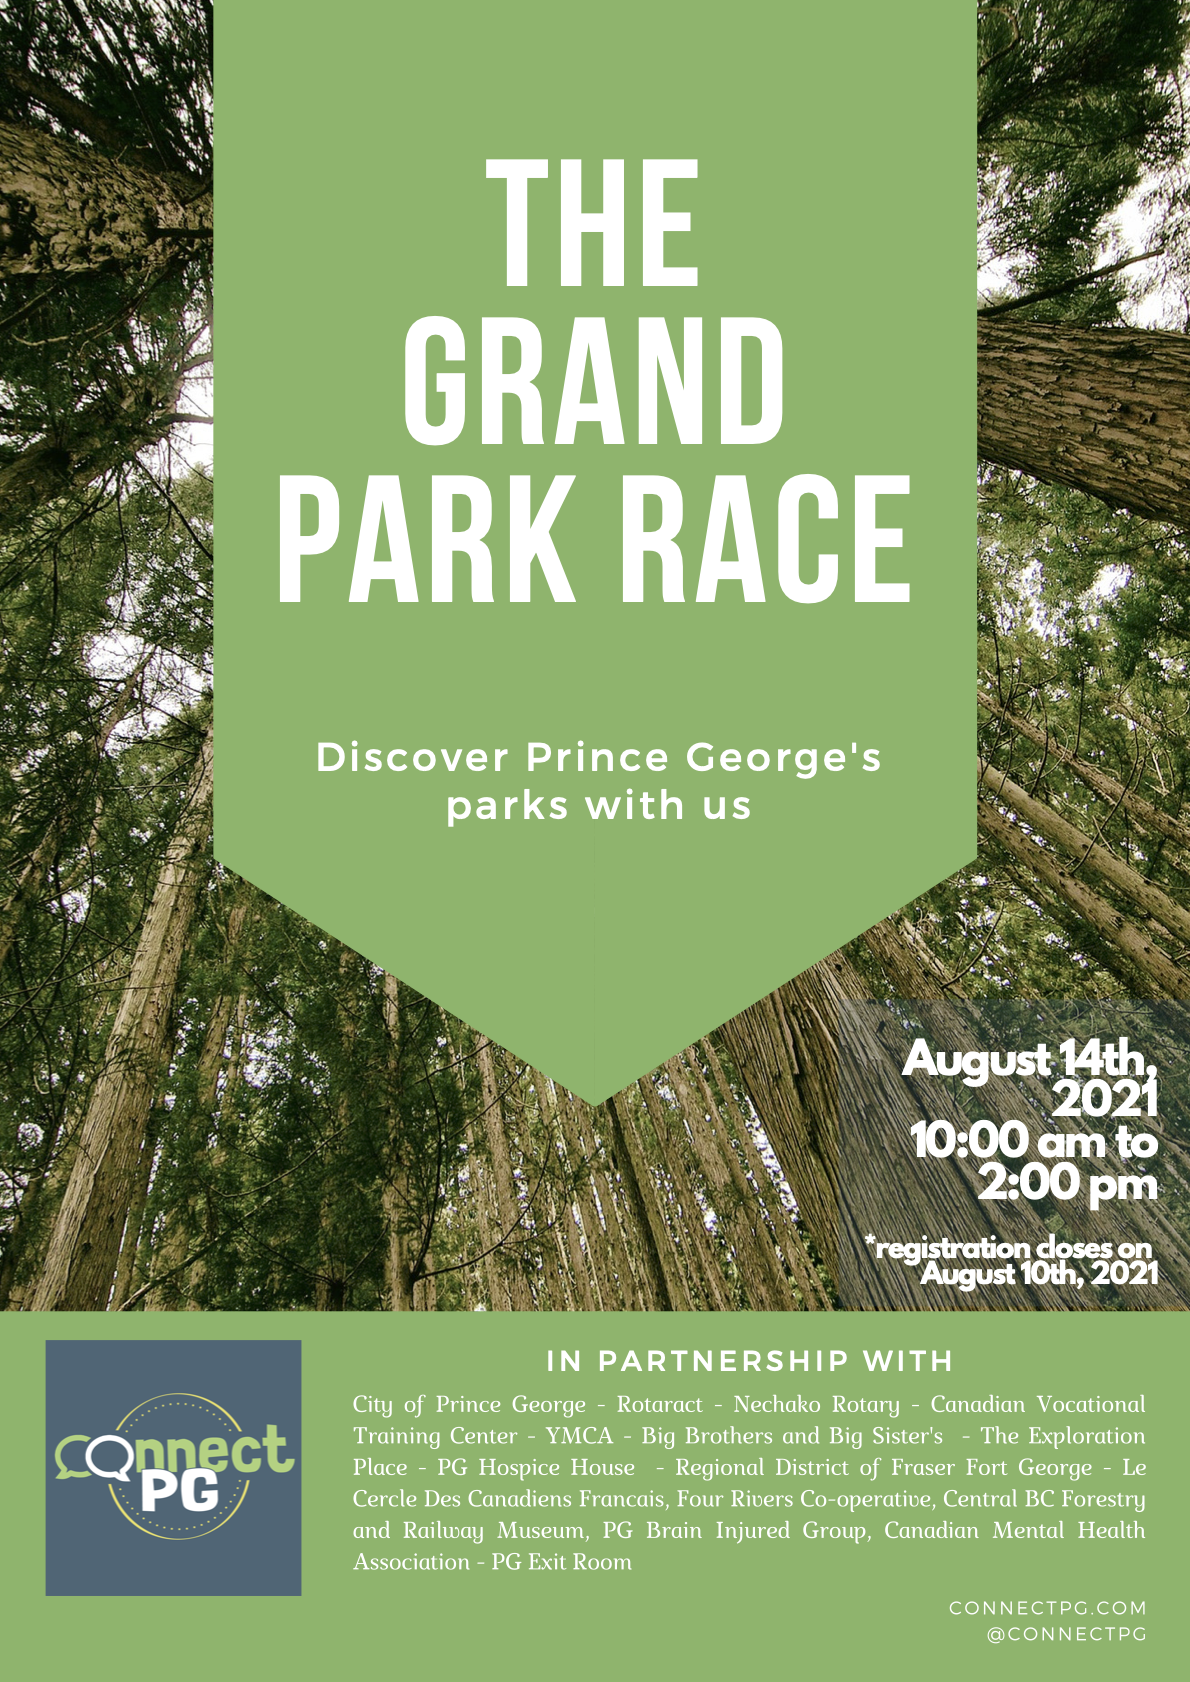 Poster. Reads "The Grand Park Race. Discover Prince George's parks with us in white text on green background over a background of trees in a forest or park. August 14th, 2021. 10:00am to 2:00pm *Registration closes on August 10th, 2021. 